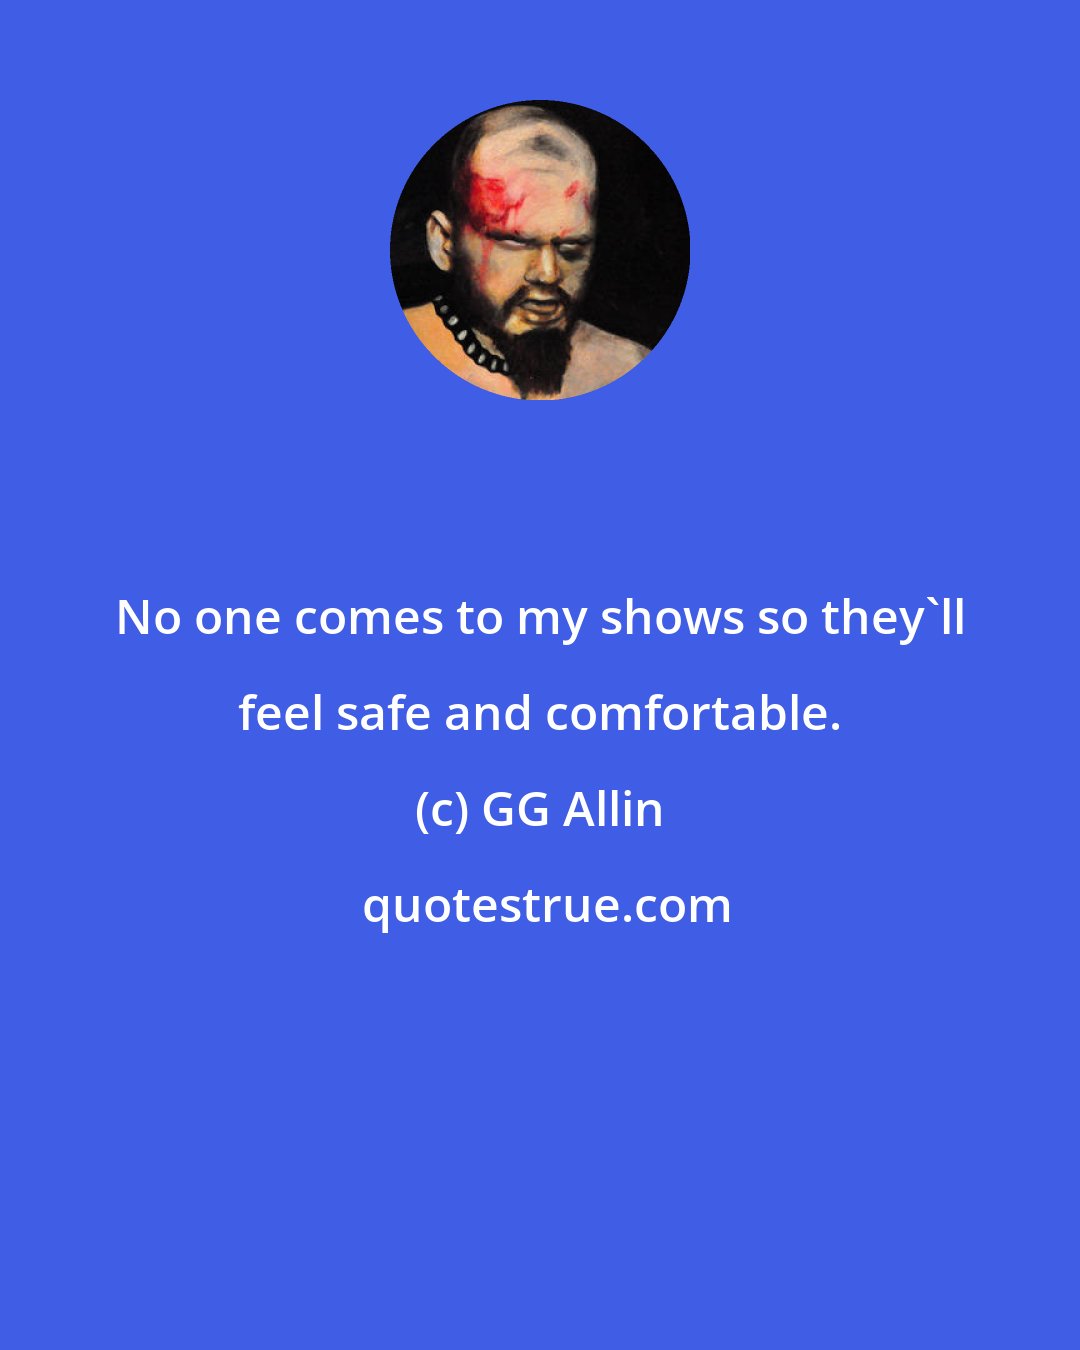 GG Allin: No one comes to my shows so they'll feel safe and comfortable.